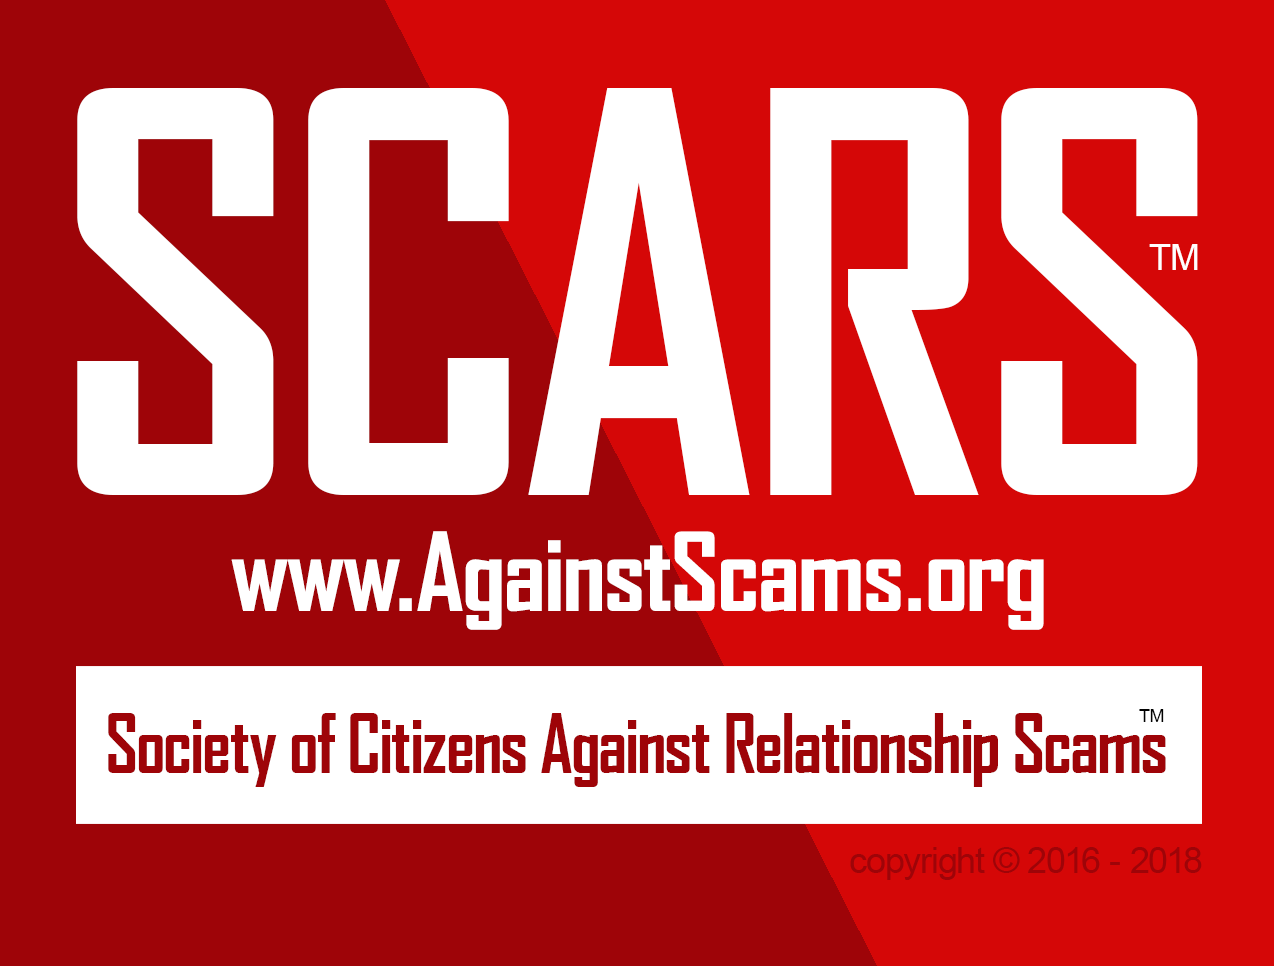 Society of Citizens Against Relationship Scams Inc.